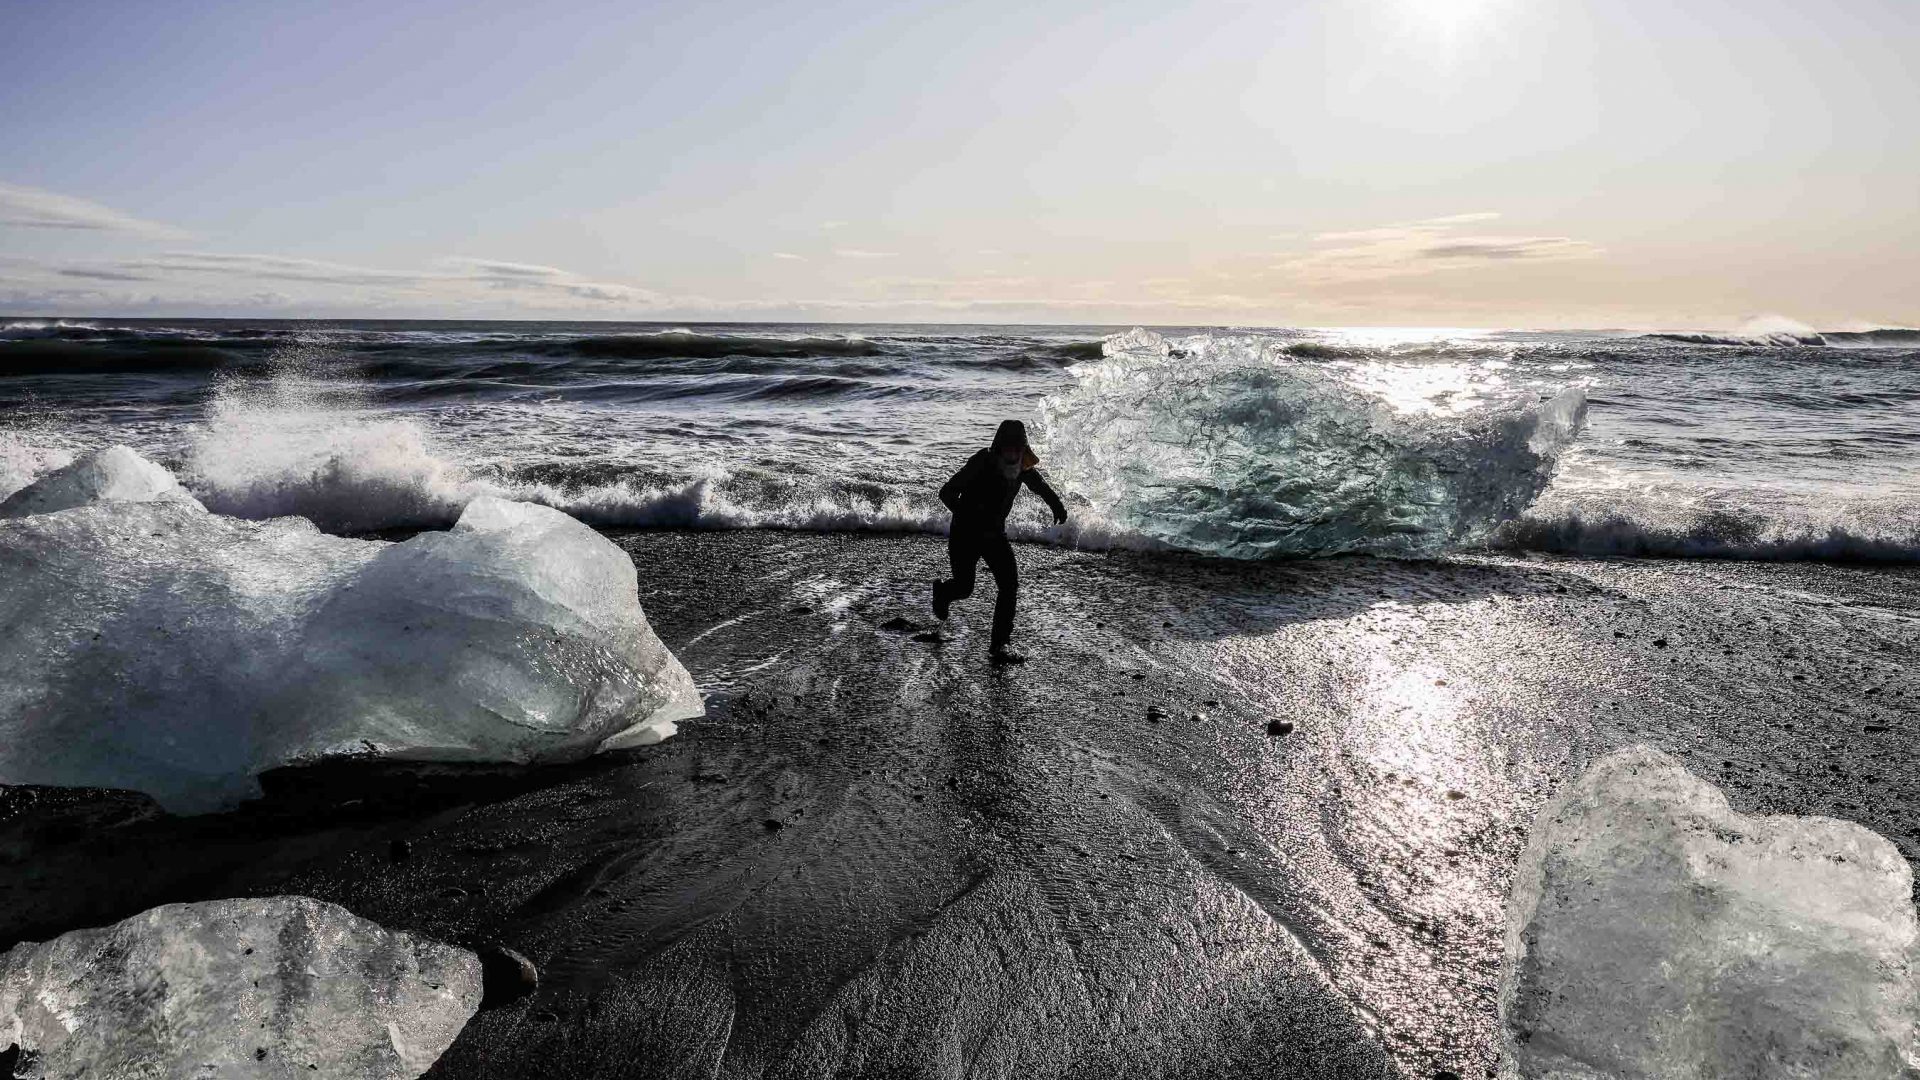 The silhouette of a person walks, surrounded by ice.